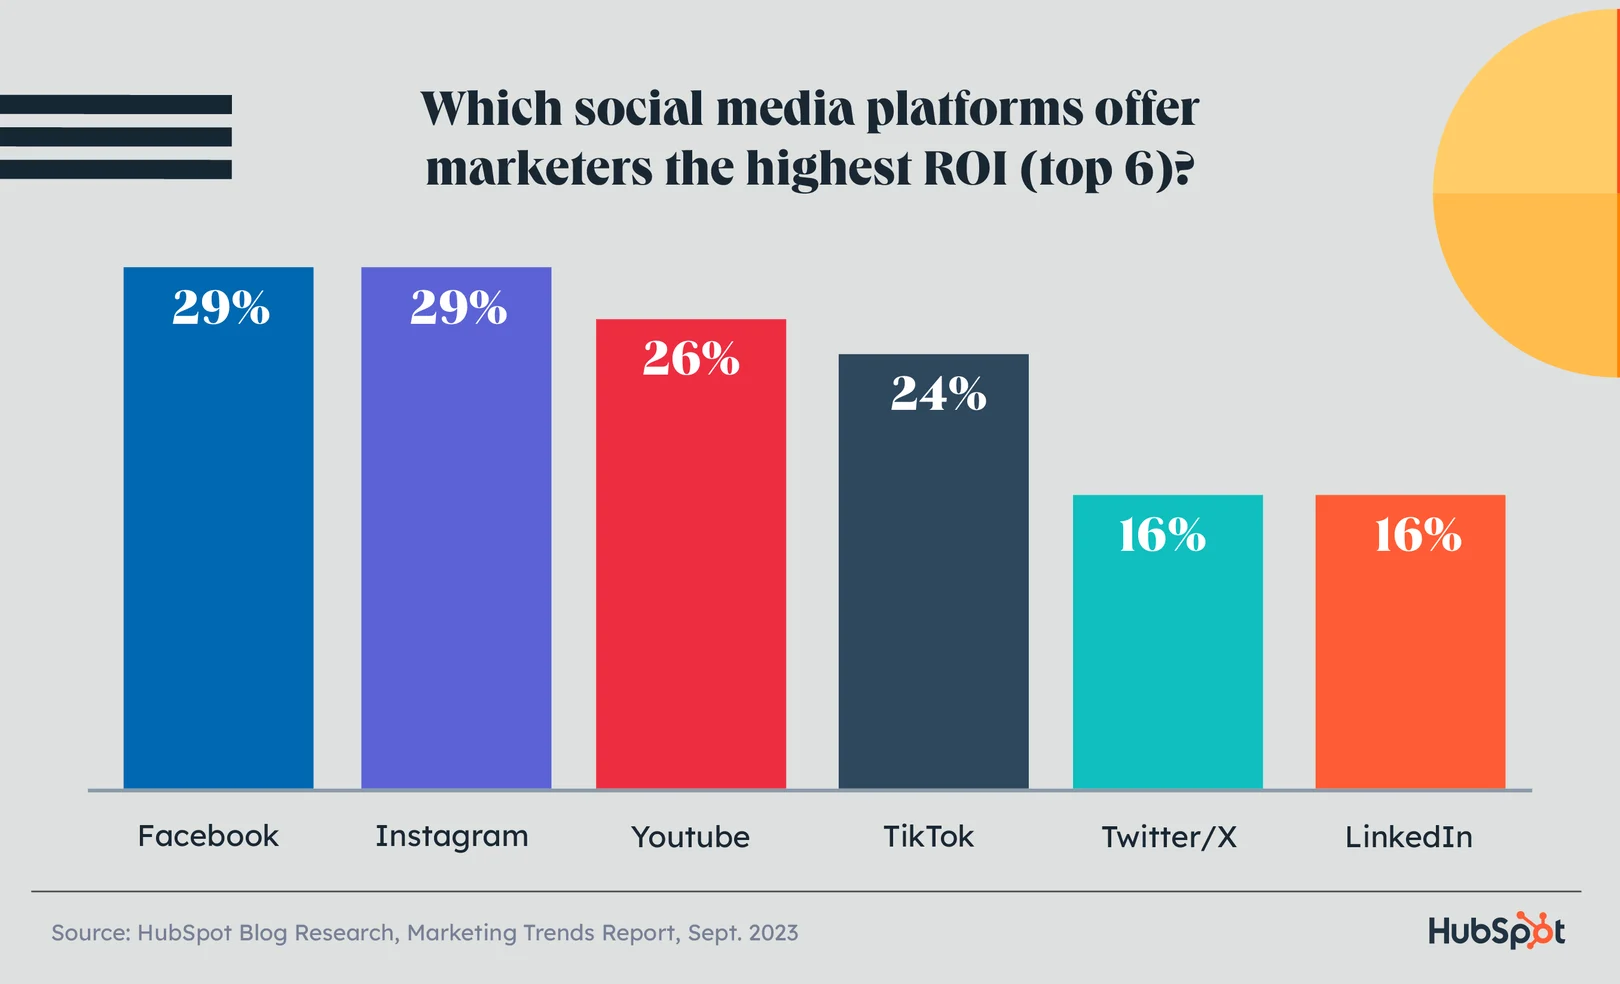 Which social media platform offers good ROI